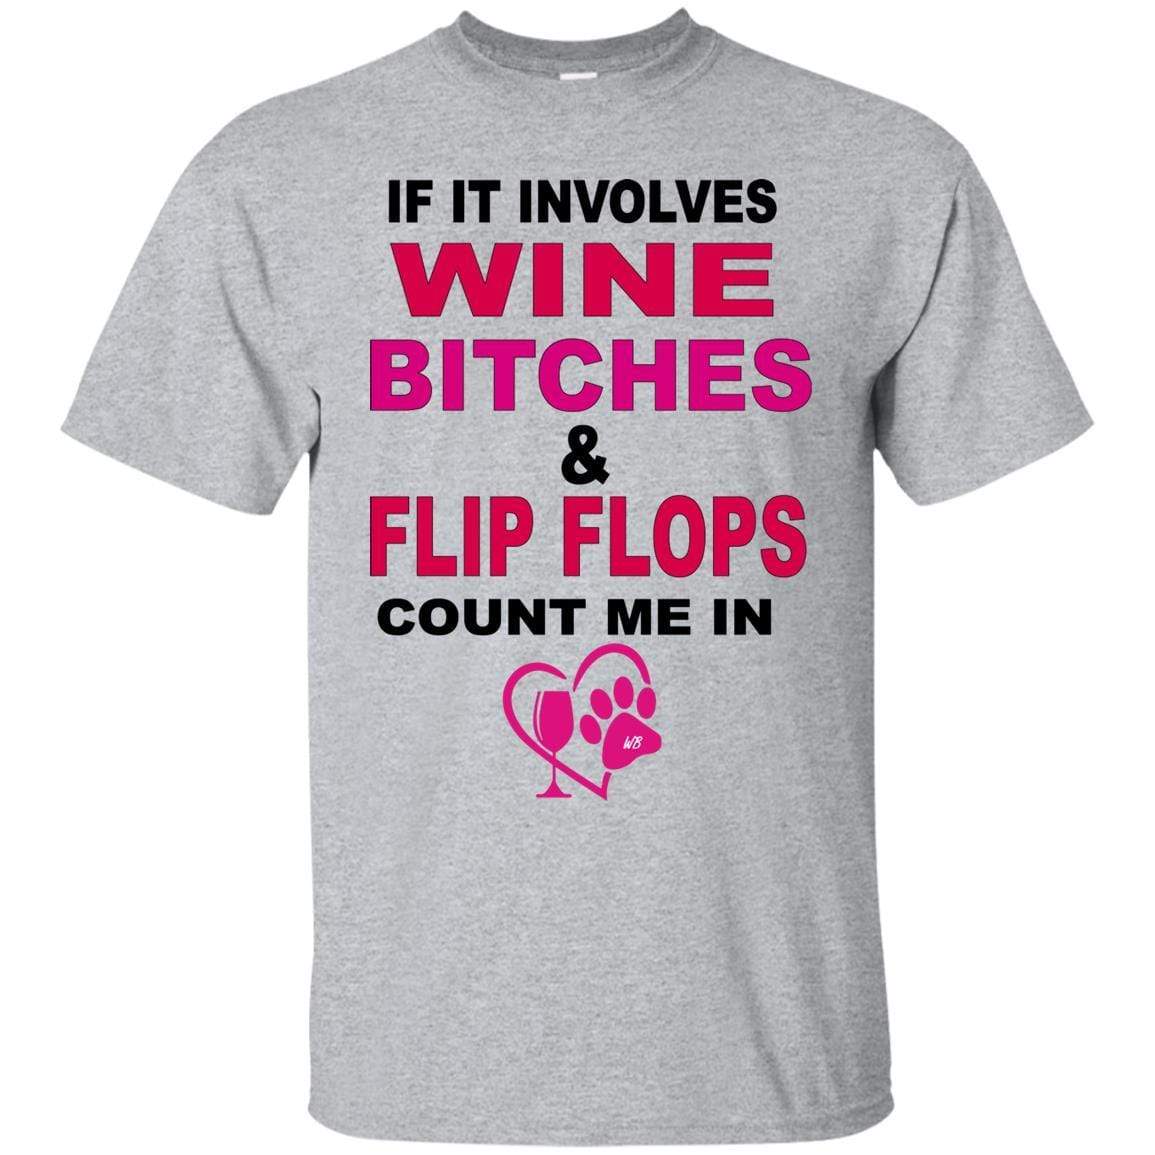 T-Shirts Sport Grey / S WineyBitches.co " If It Involves Wine Bitches & Flip Flops I'm In" Ultra Cotton Unisex T-Shirt WineyBitches.co Hilariously Funny T-Shirt for Wine & Dog Lovers   WineyBitchesCo